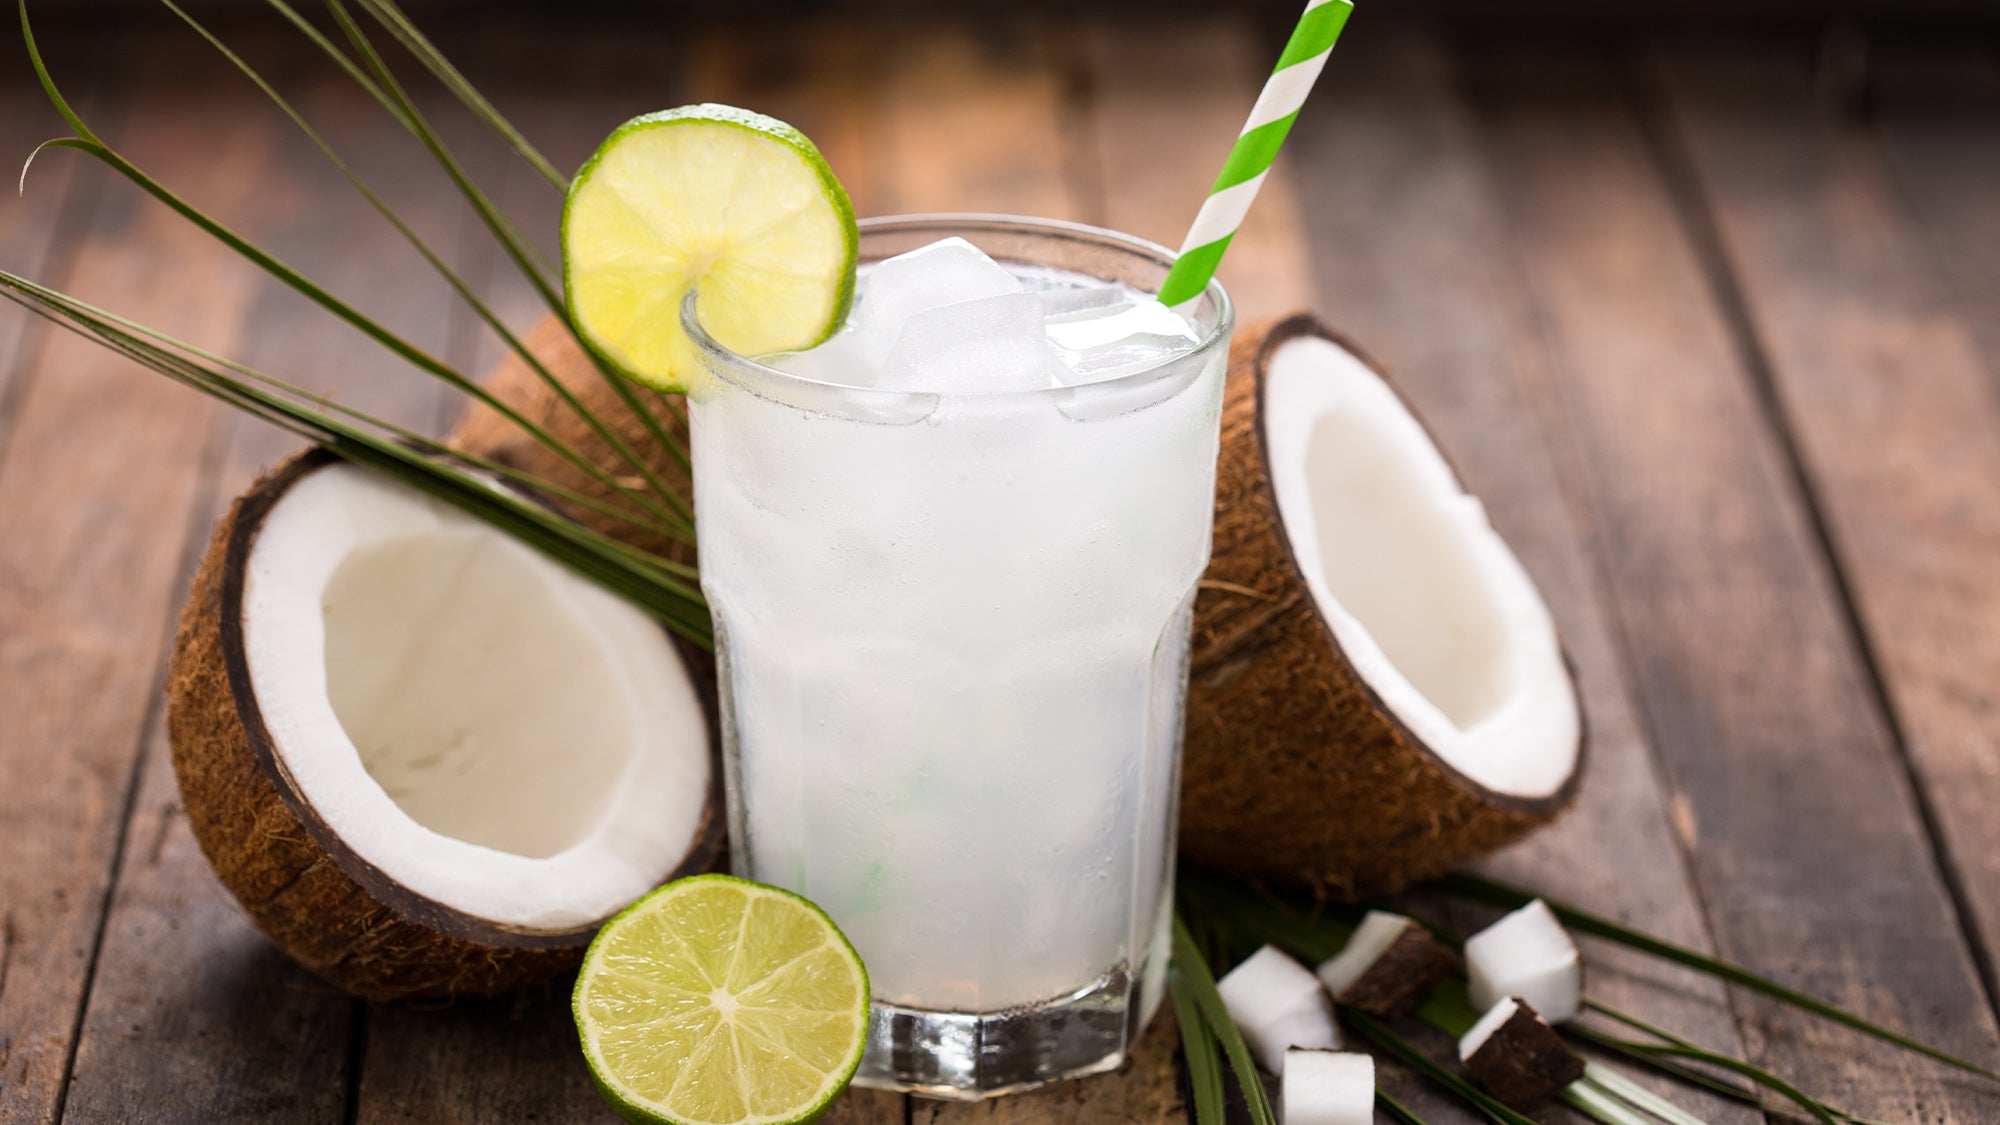 Glass of coconut water surrounded by coconuts and limes